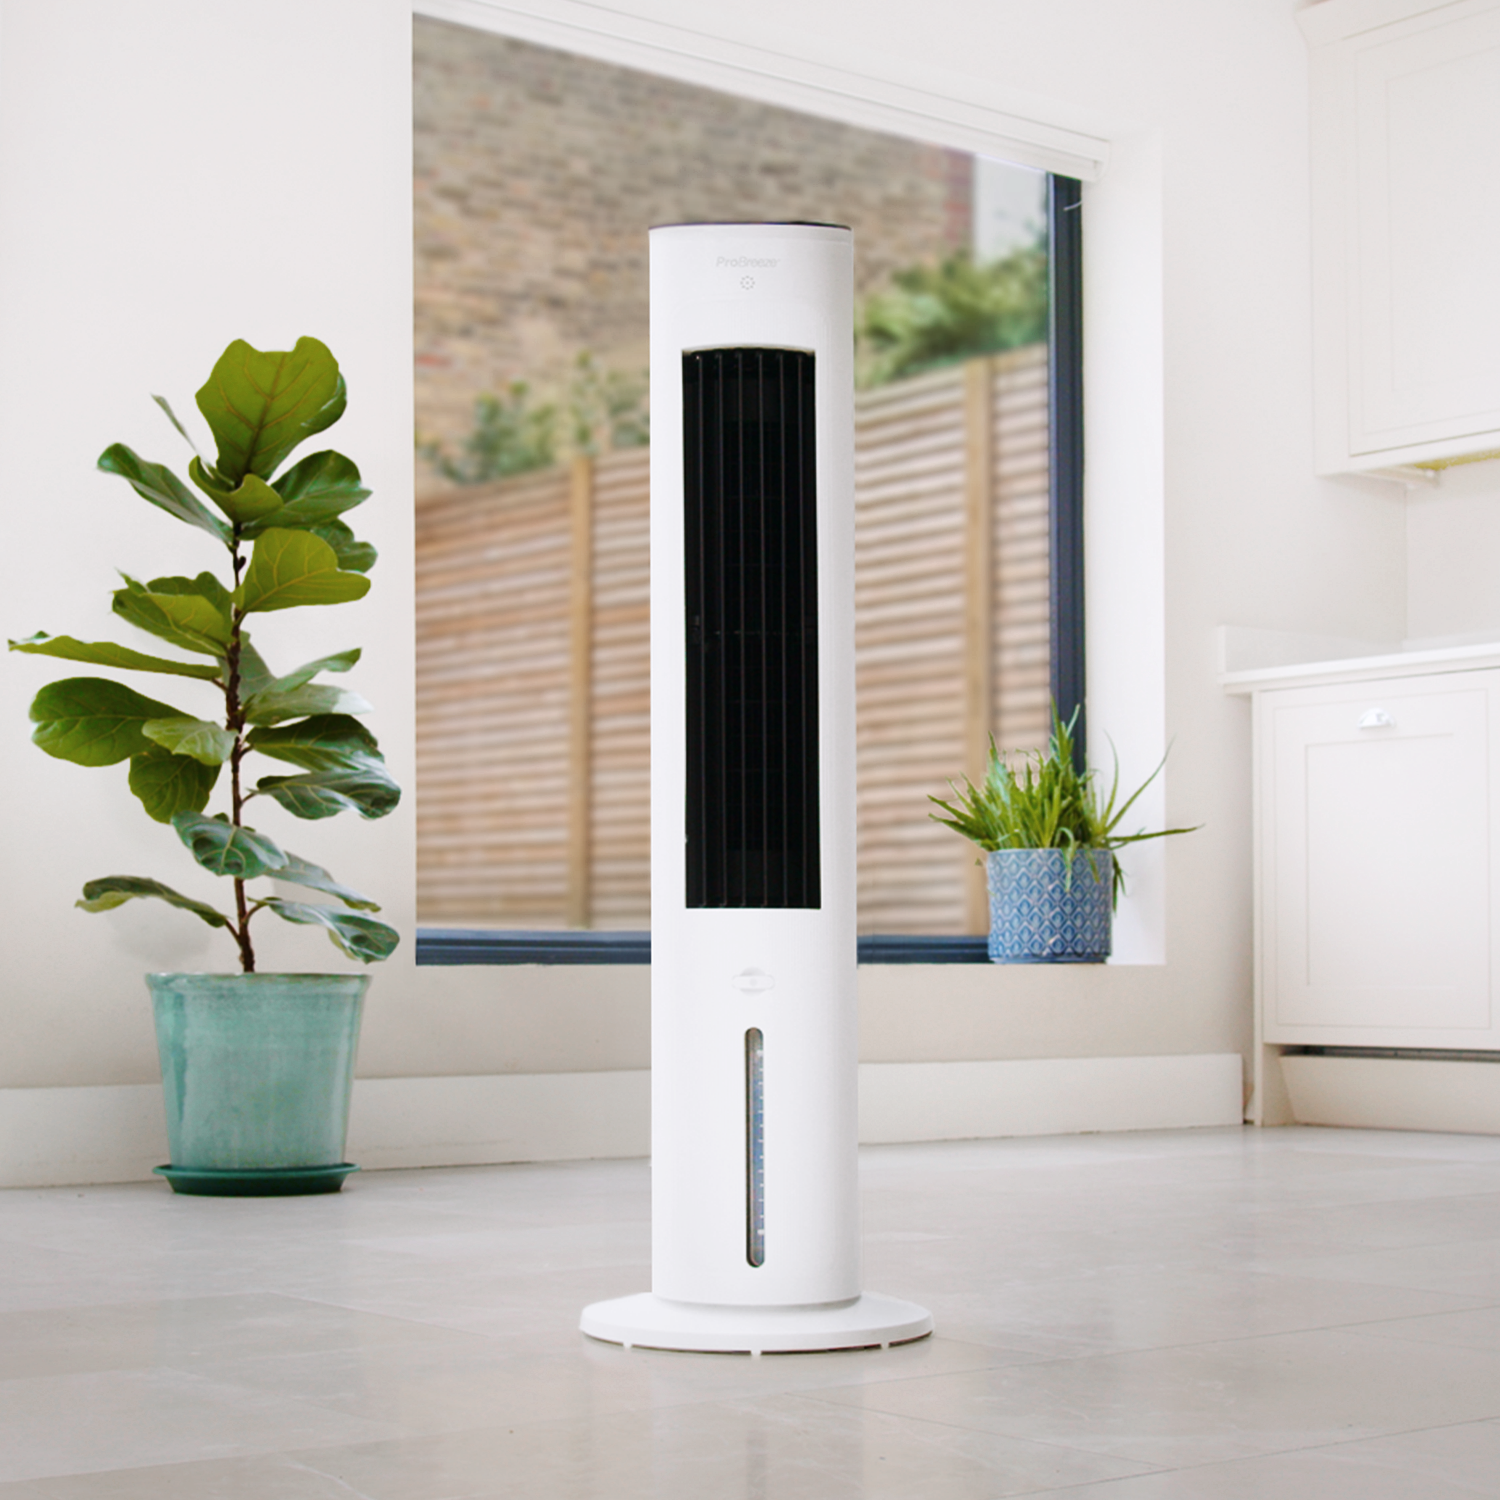 5L Evaporative Air Cooler & Portable Tower Fan With Humidification Modes